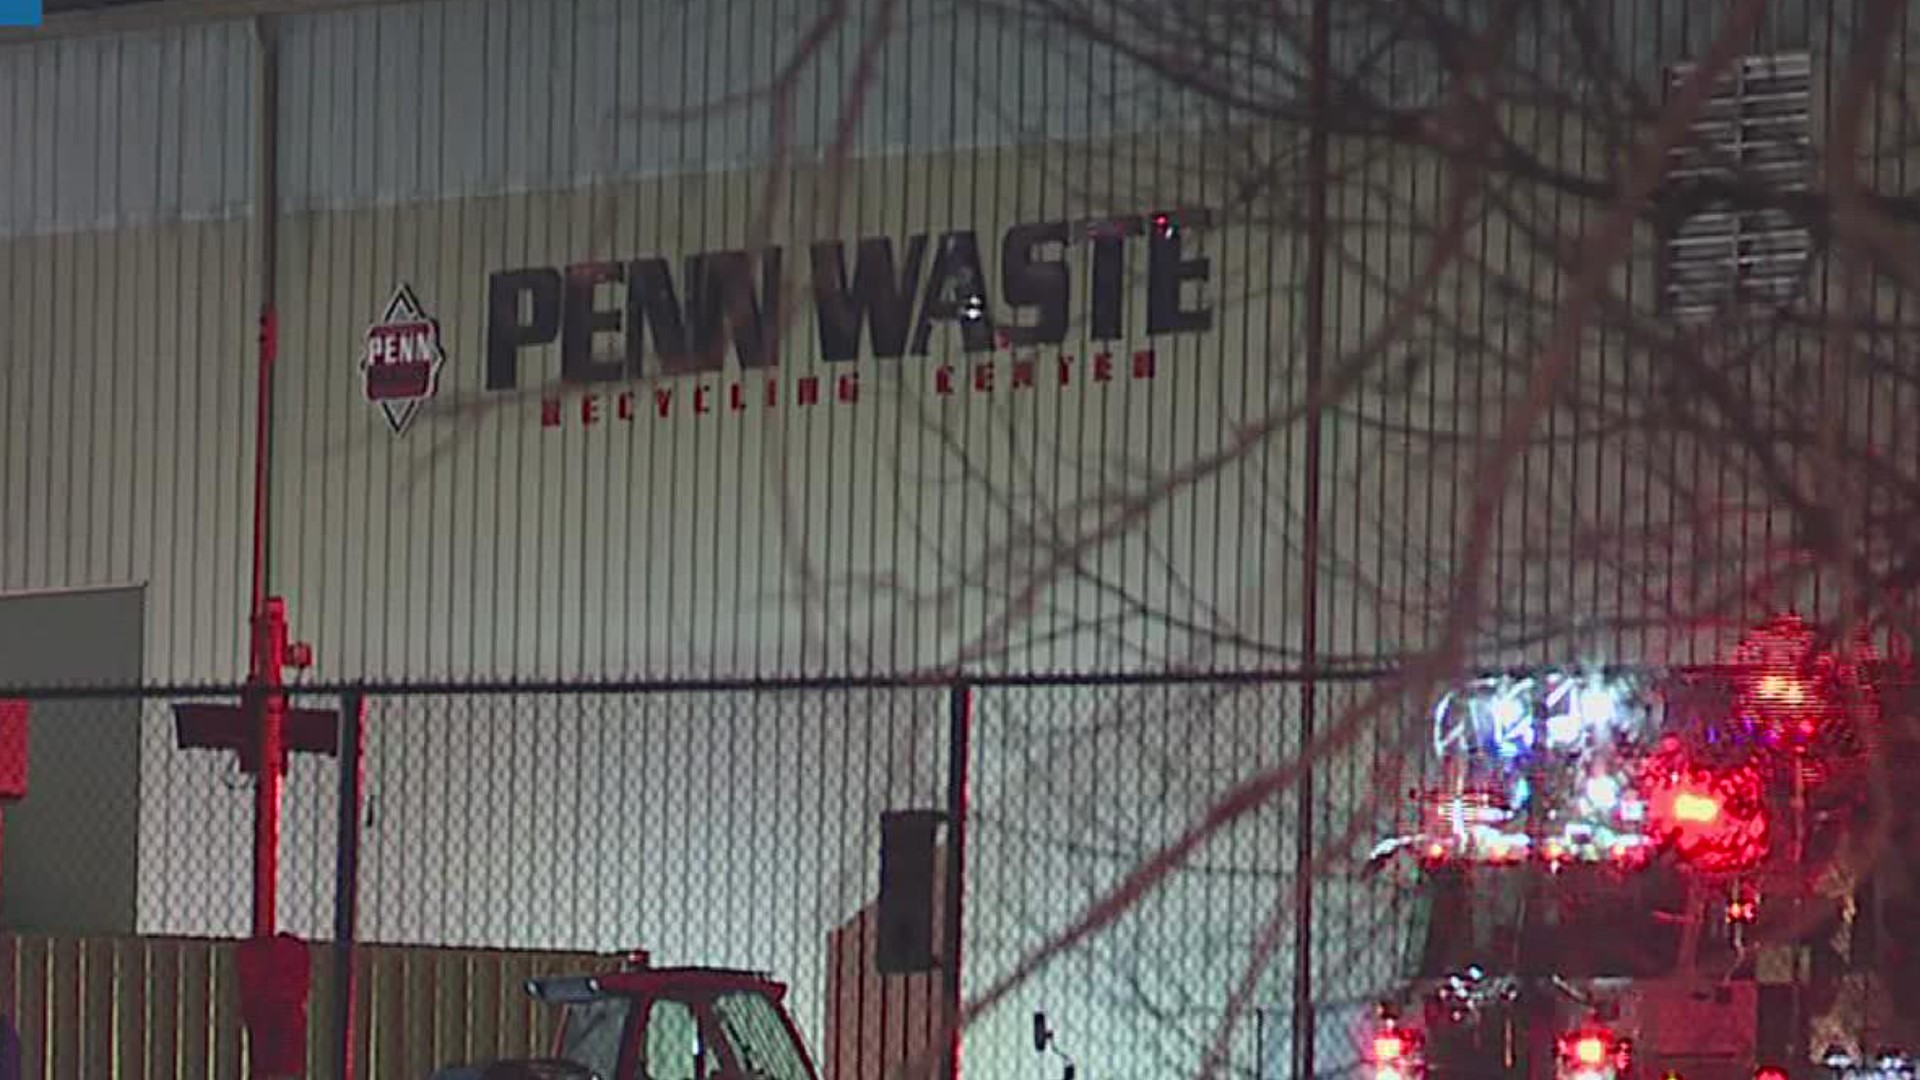 According to fire officials, 40 employees were inside the facility at the time of the fire and one firefighter was transported to the hospital with minor injuries.